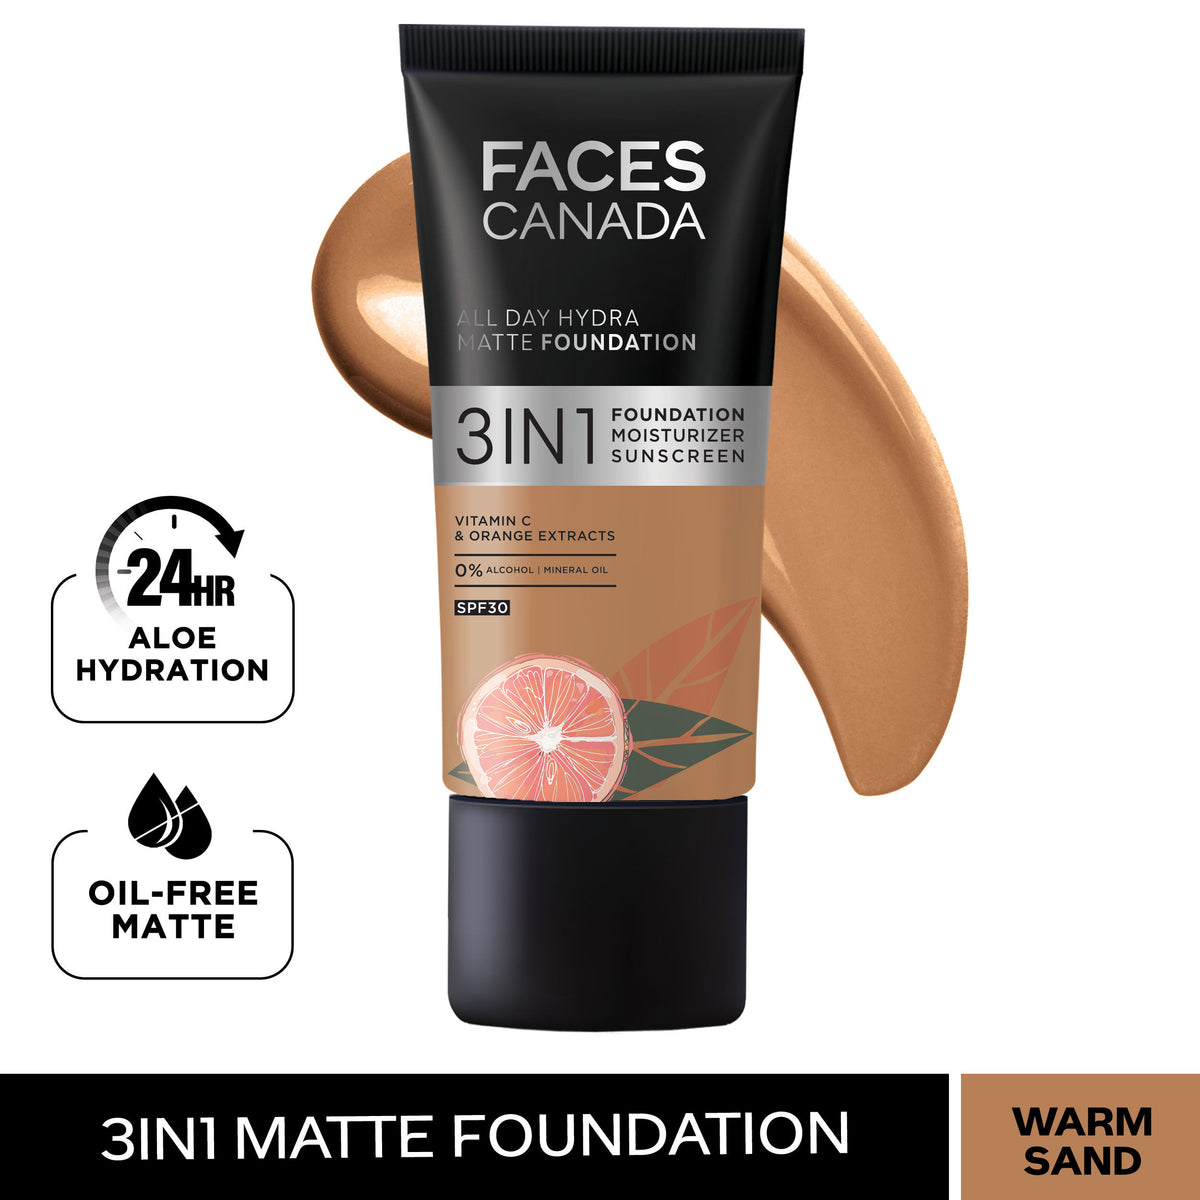 Faces Canada 3 In 1 All Day Hydra Matte Foundation - Warm Sand 042 (25ml) Faces Canada